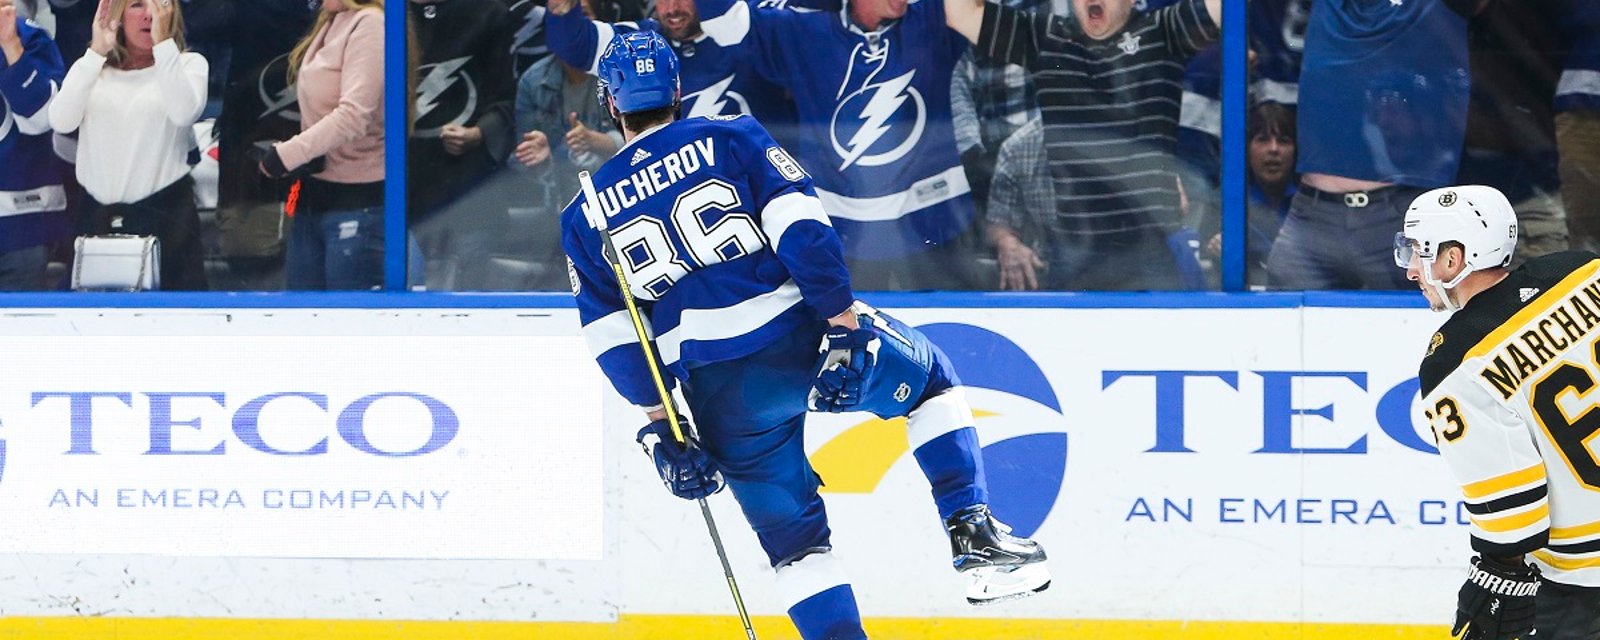 Nikita Kucherov sets an NHL record off the back of another amazing performance.